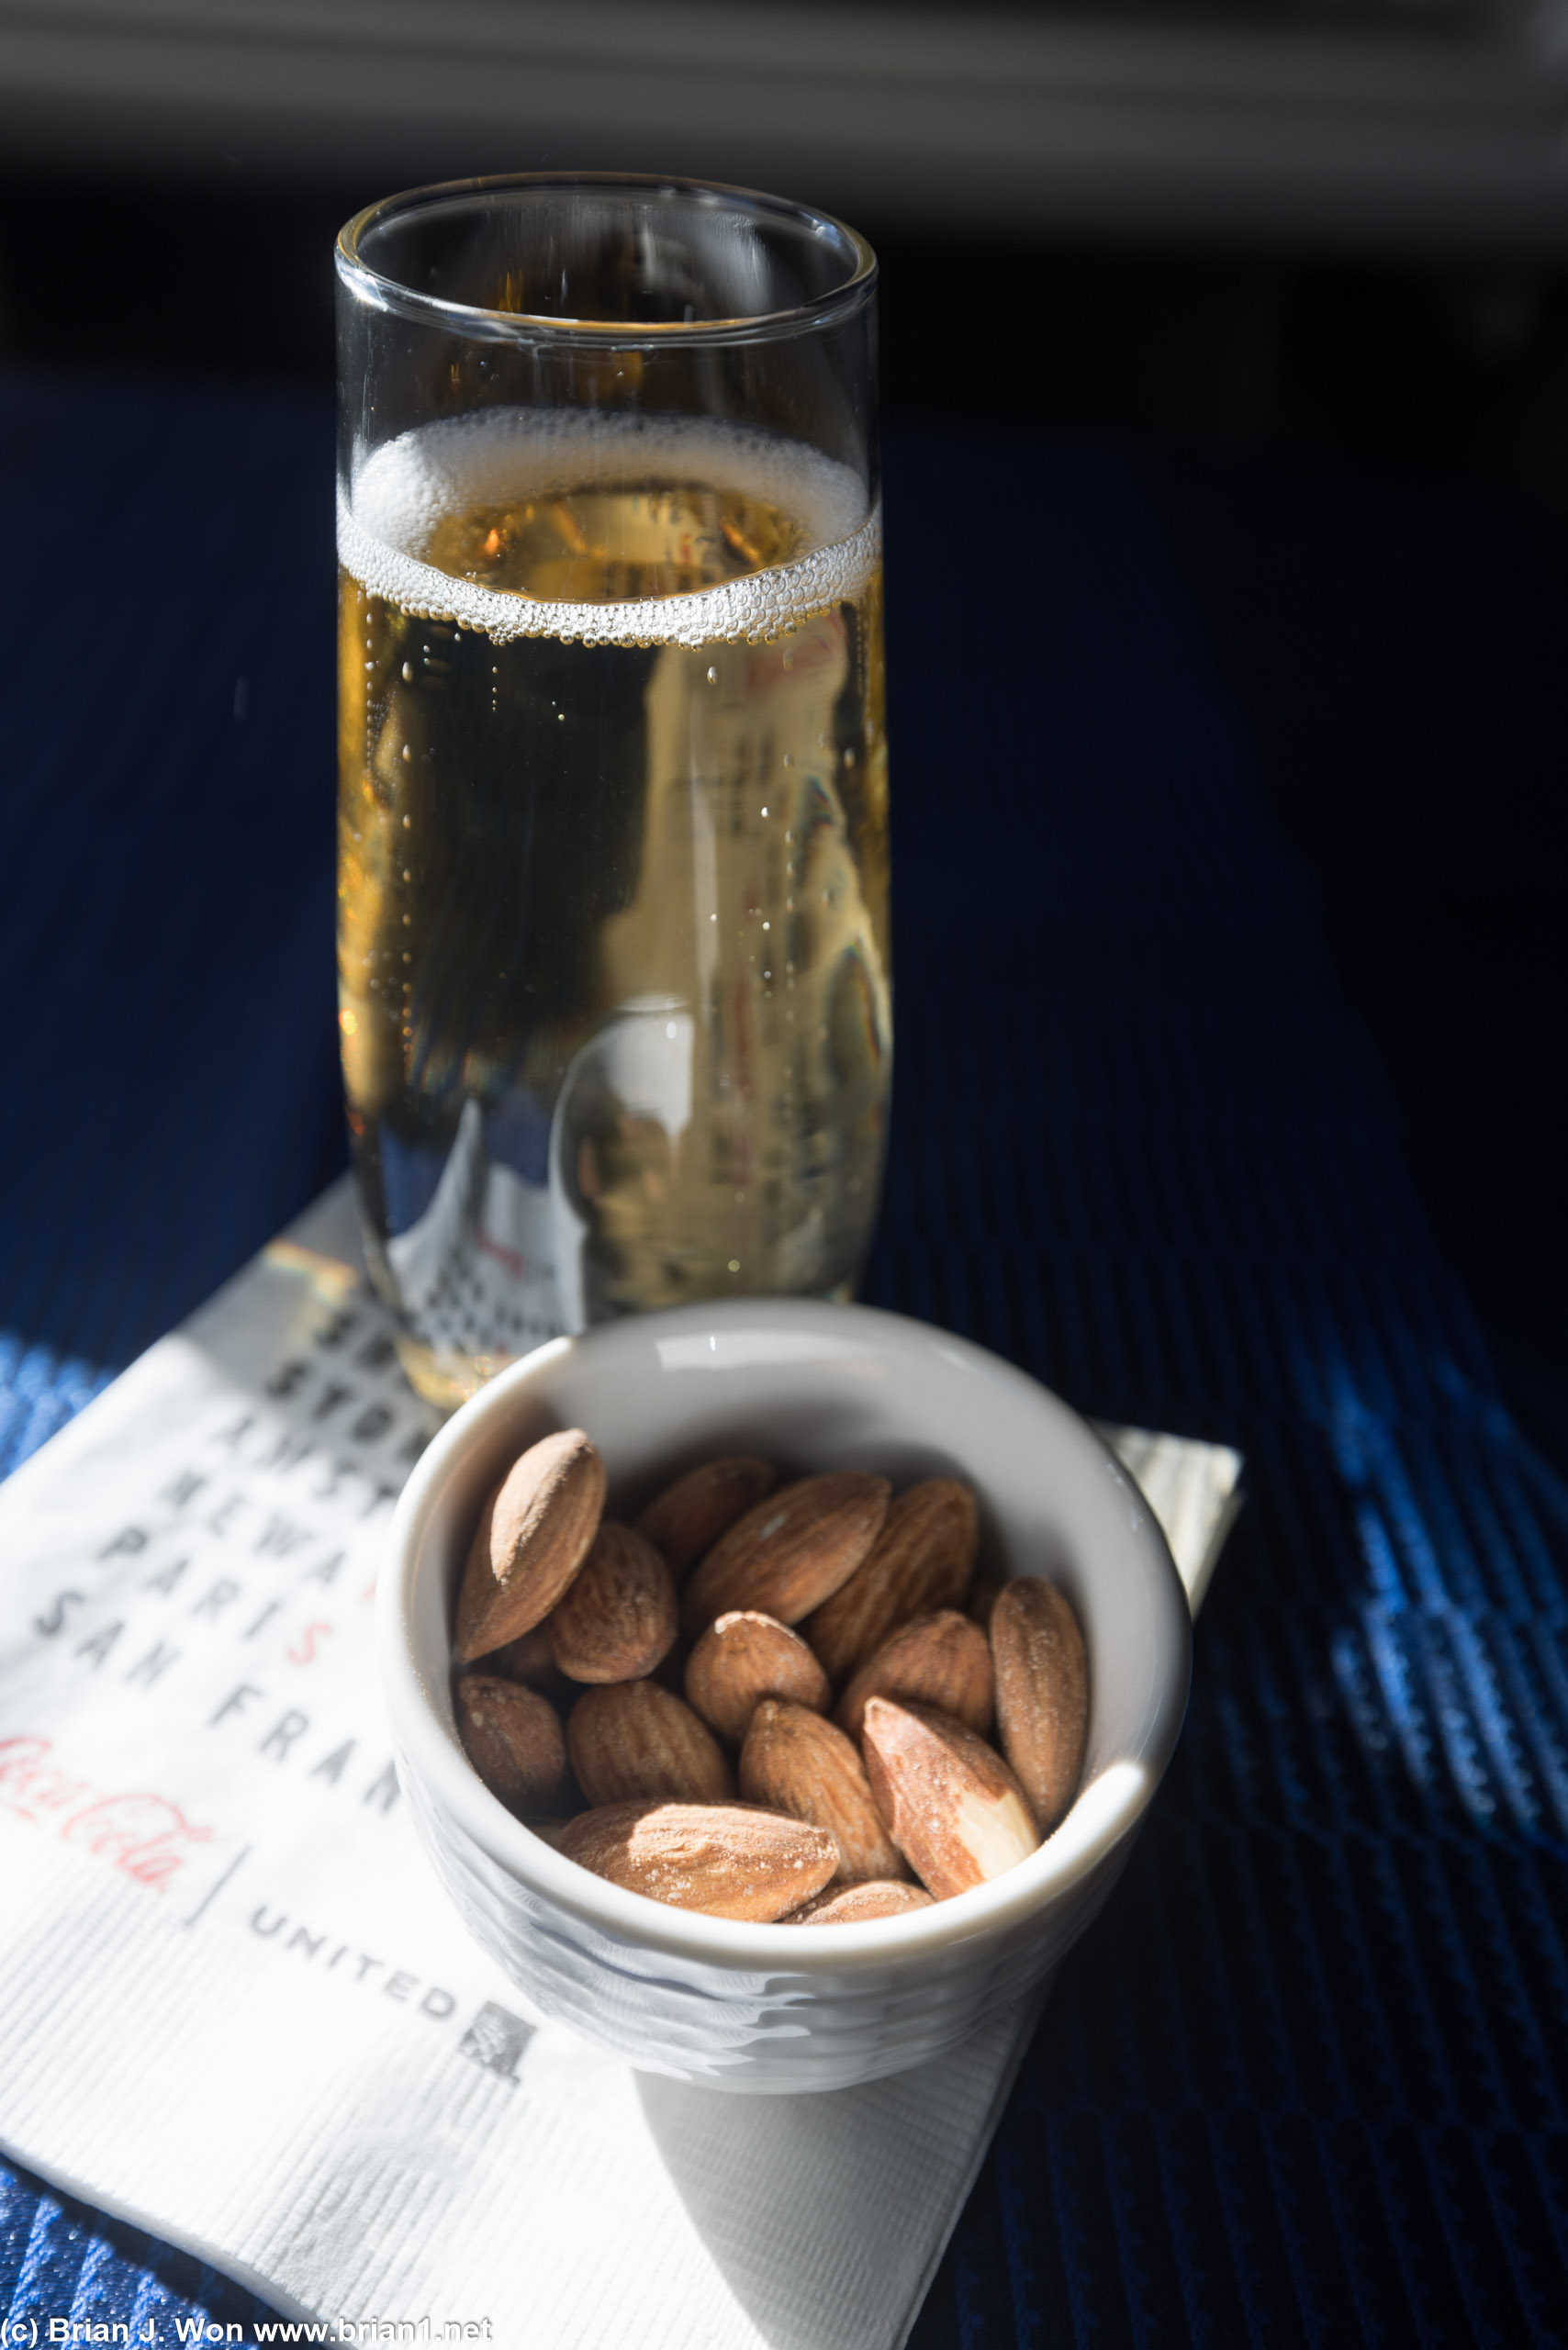 Warm nuts and actual champagne (!).